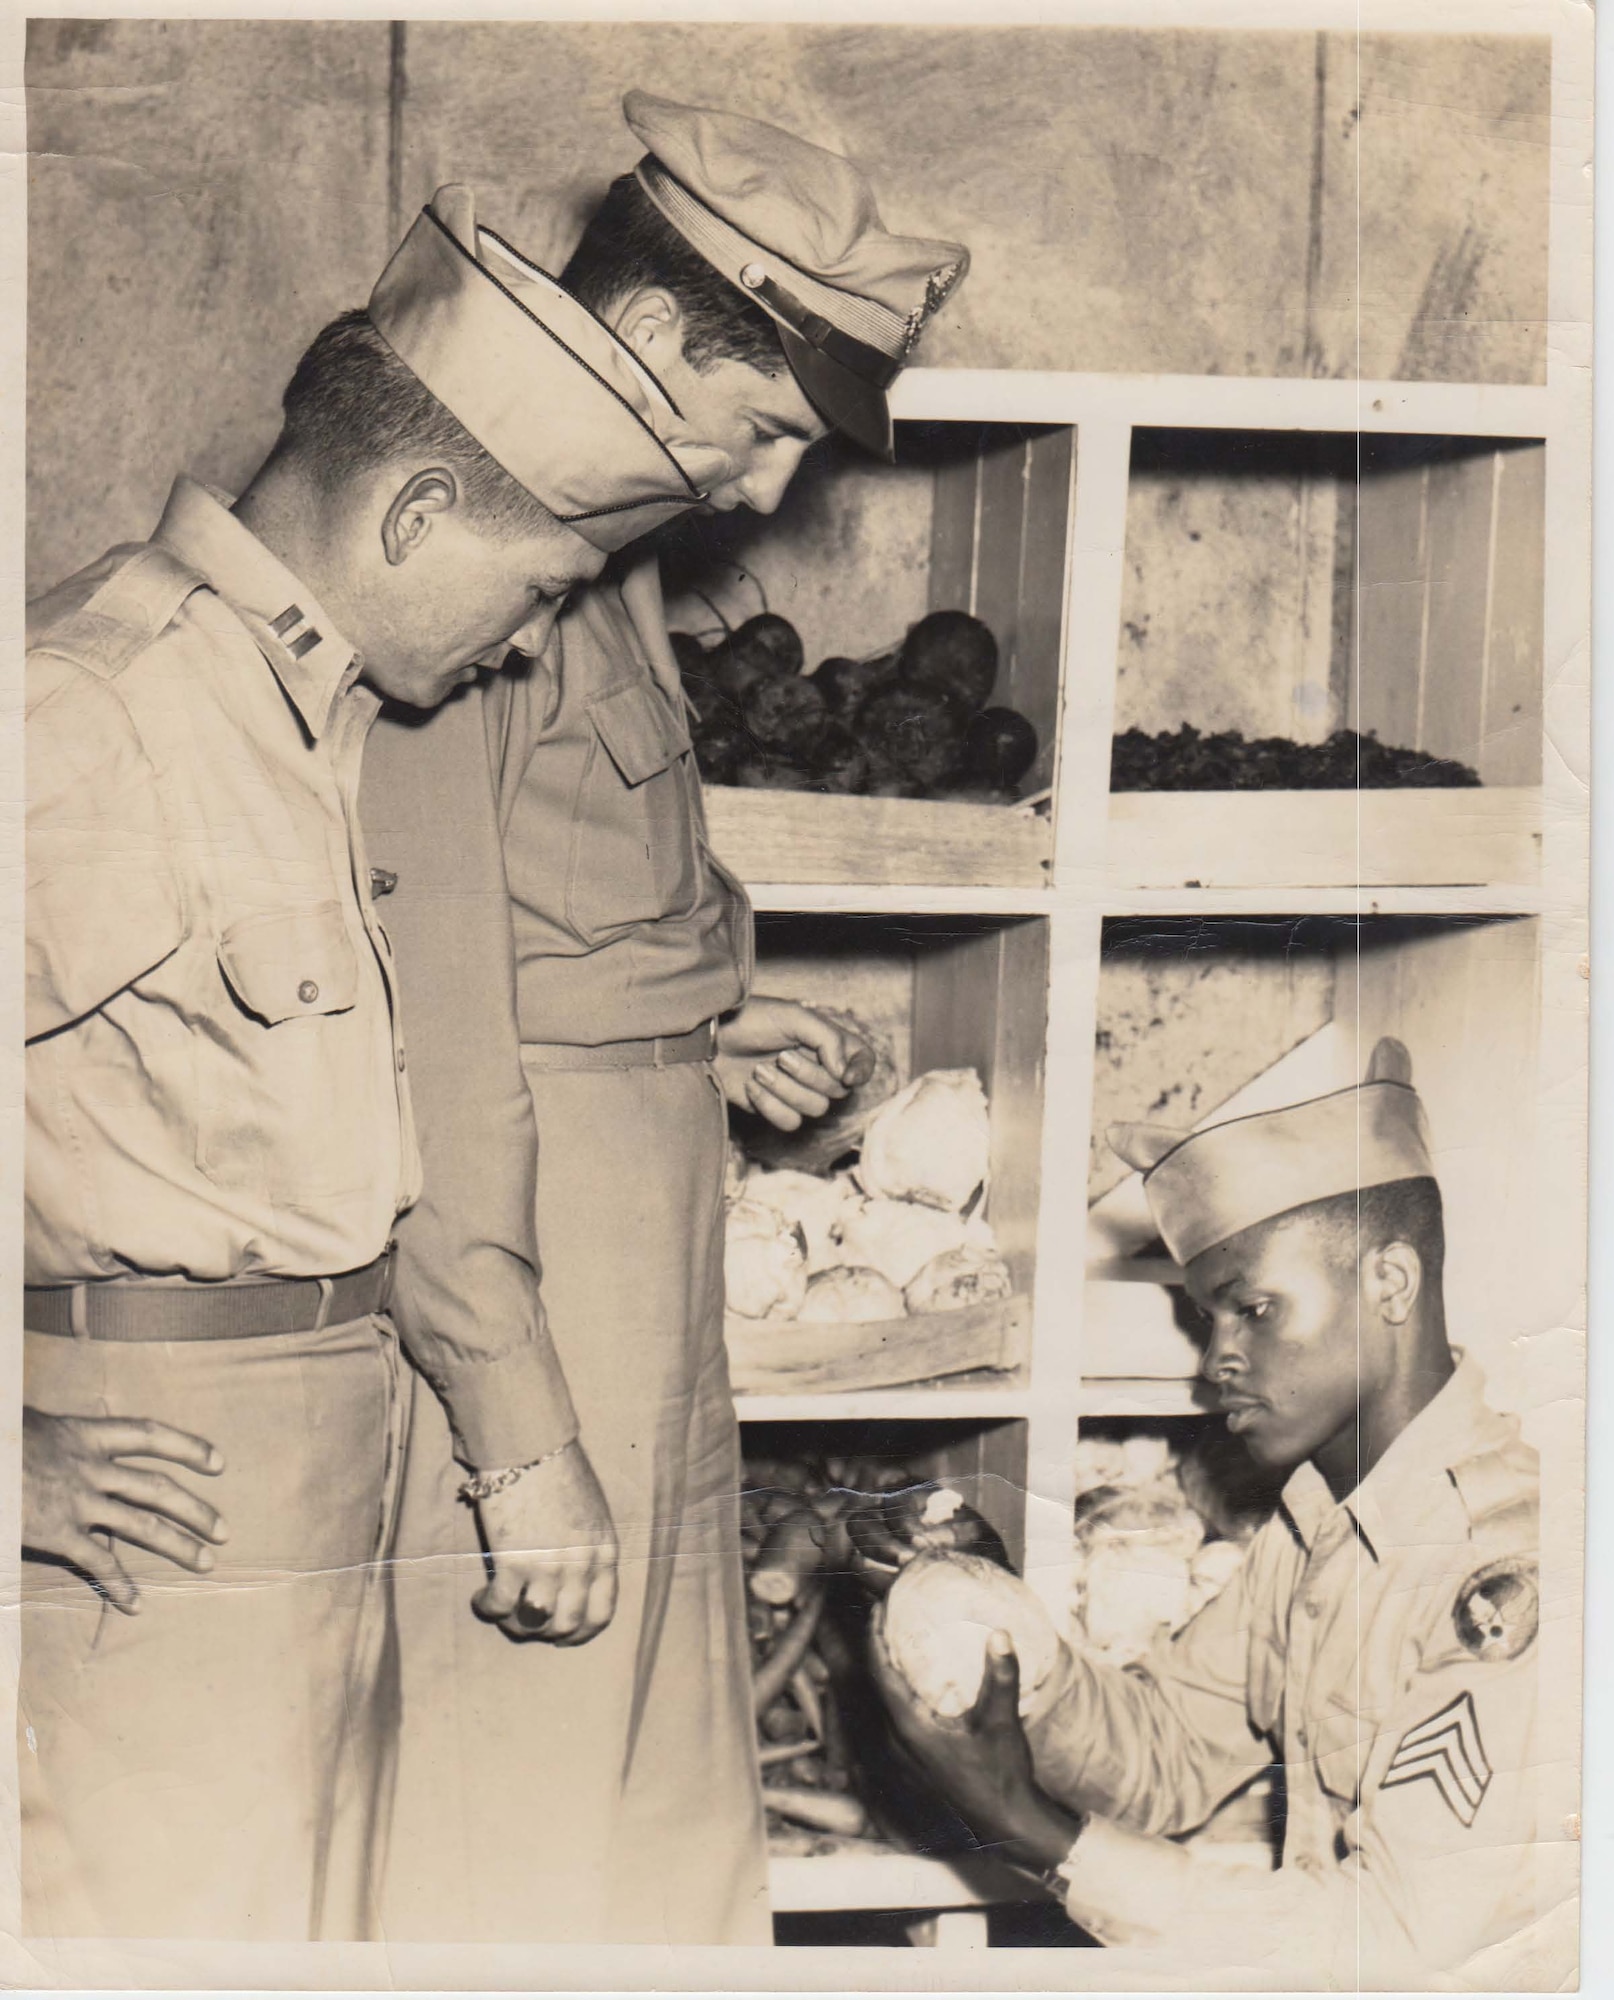 Capt. Harry C. Aderholt, the commander of Squadron F, 2123 Army Air Force, left, conducts a supply inventory at Maxwell Field in September 1945.  He was commander of a segregated African American unit at Maxwell Field.  Captain Aderholt eventually rose to the rank of brigadier general, U.S. Air Force, and was a prominent figure in Air Force Special Operations in the 1950s and 1960s. (Courtesy photo U.S. Air Force)